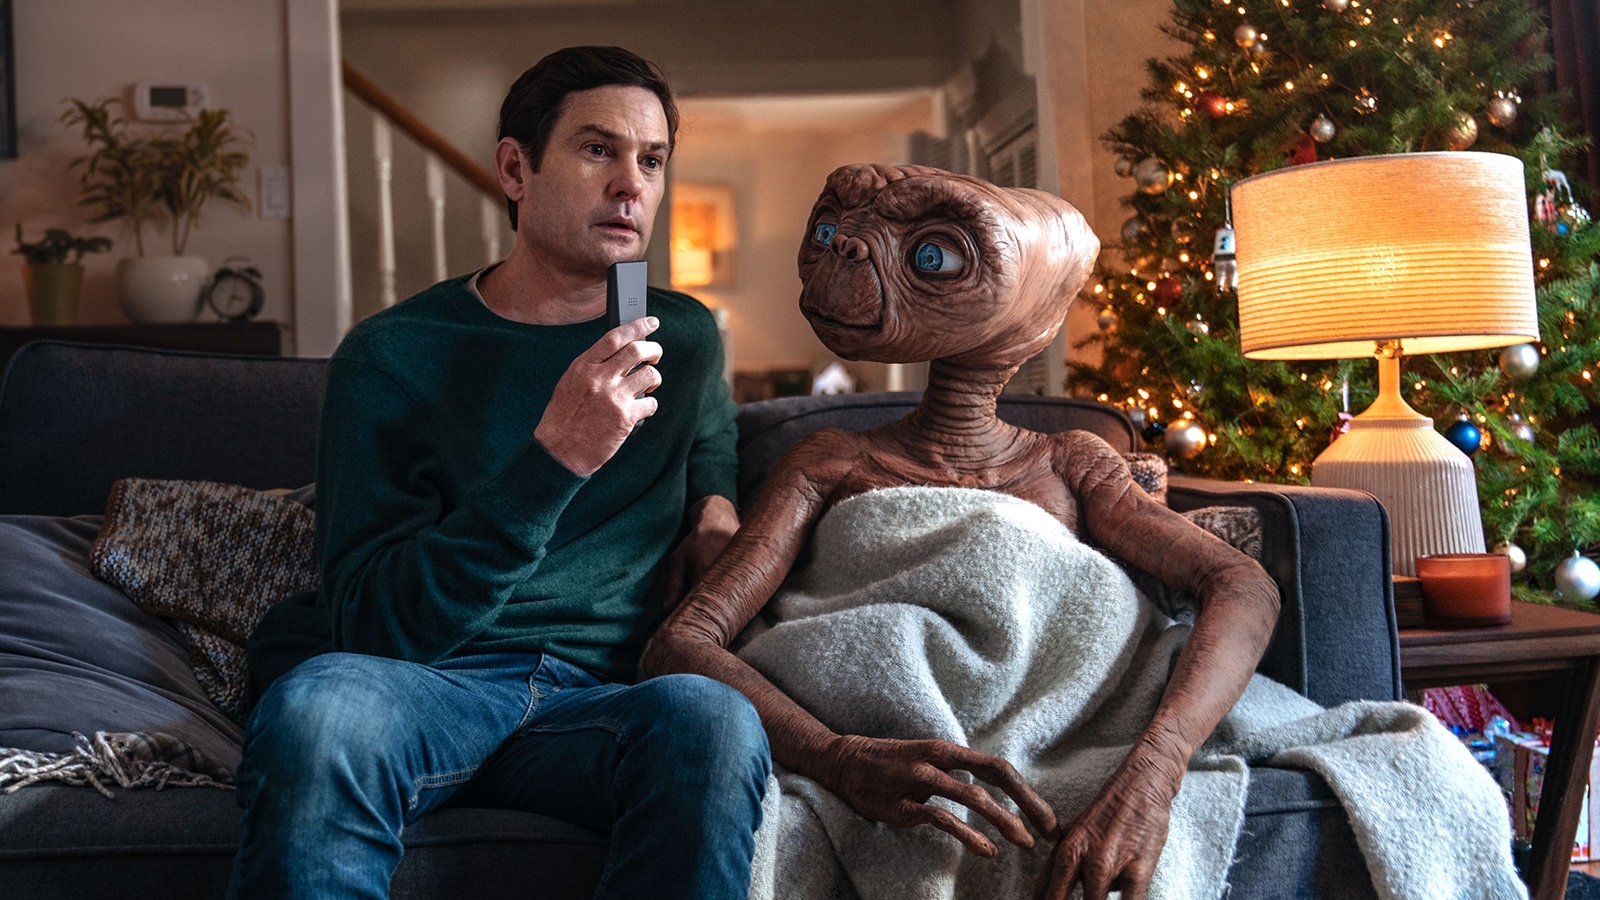 Comcast revives 'E.T.' to hawk cable and internet service | DeviceDaily.com